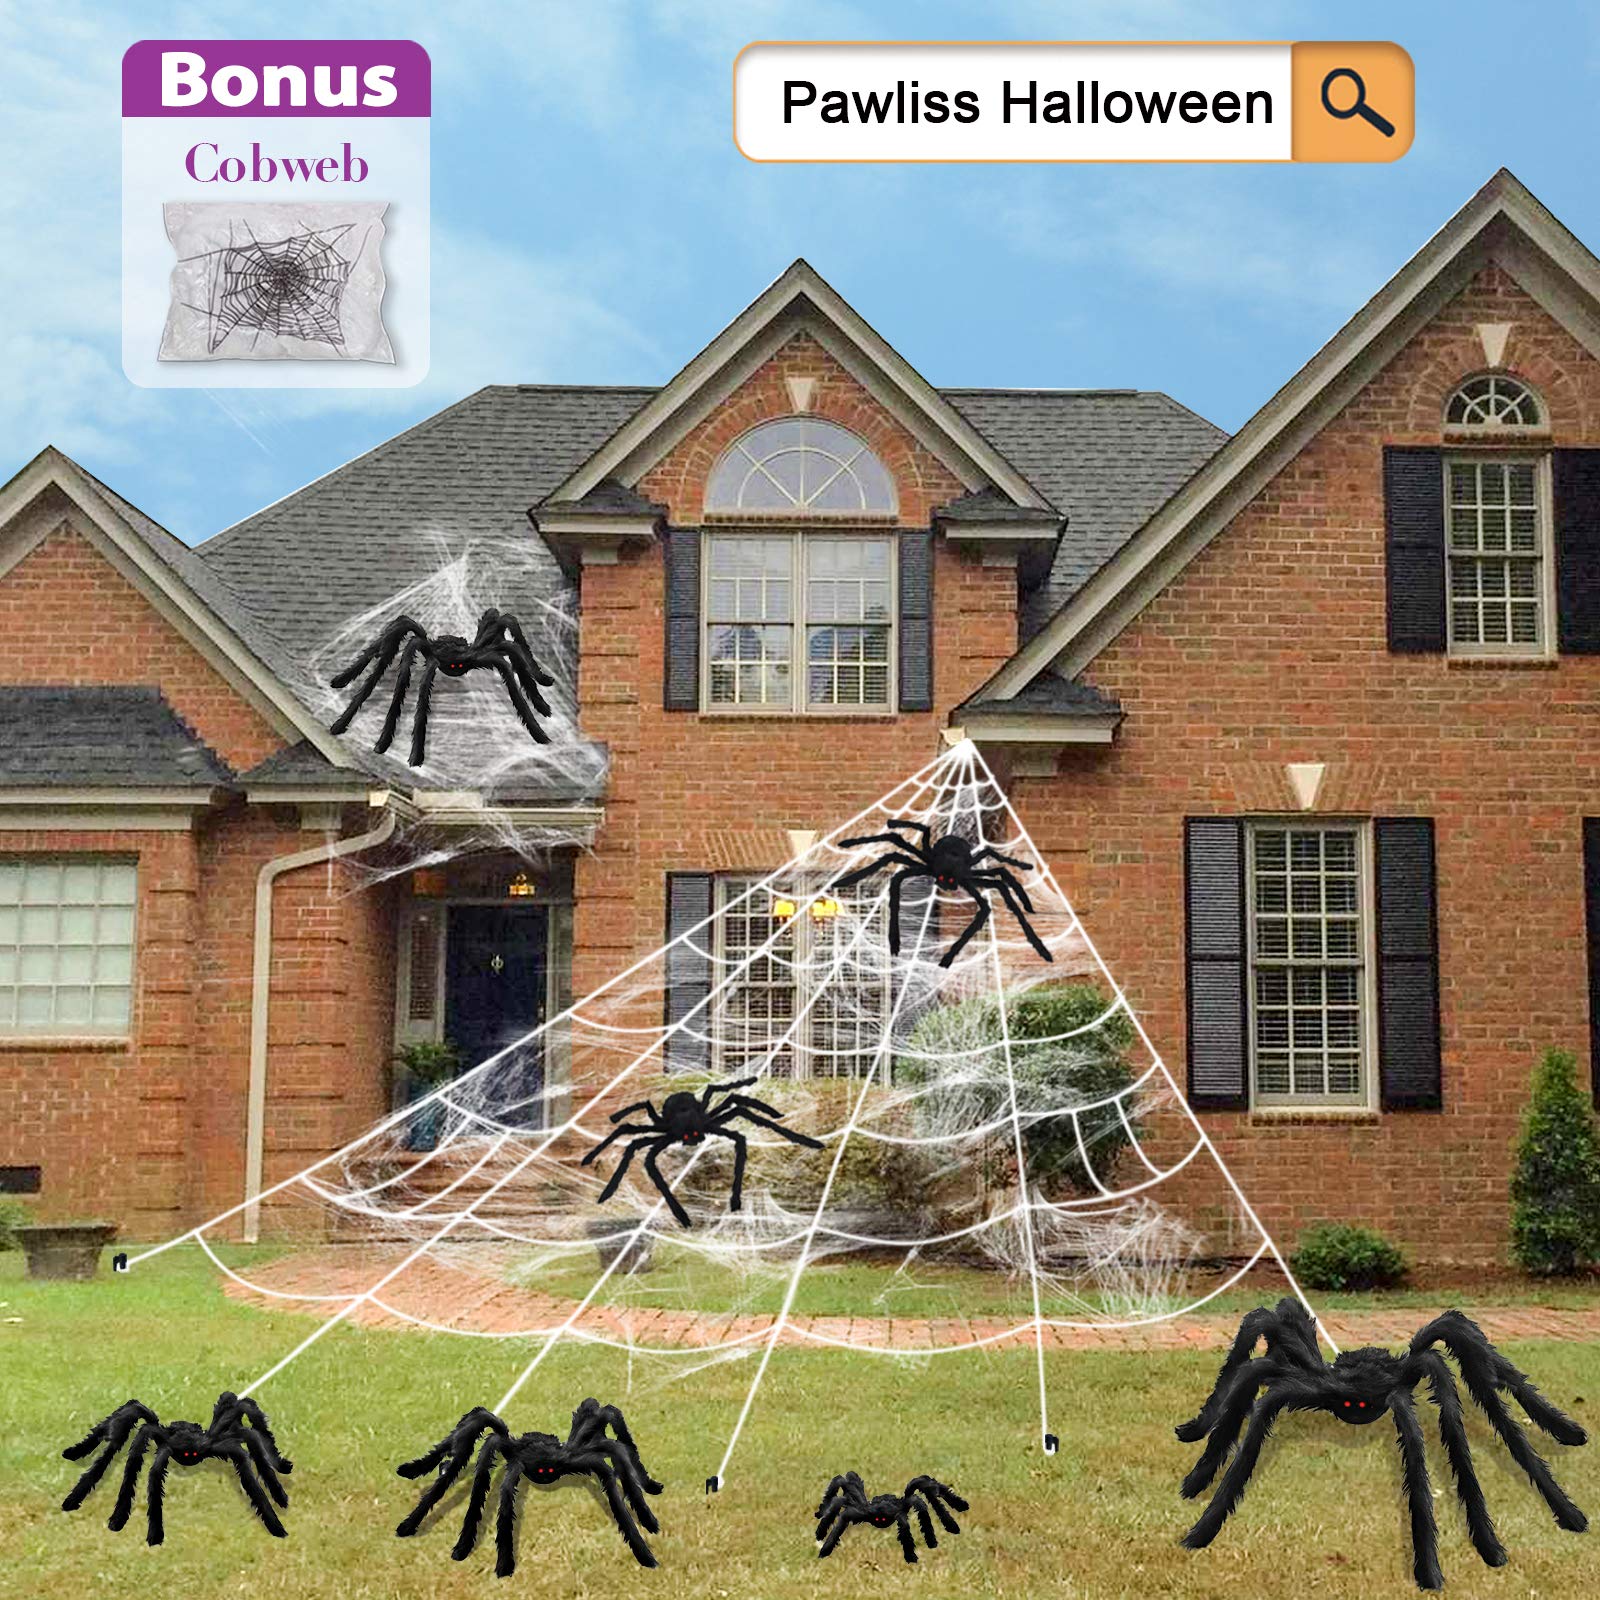 Pawliss Halloween Decorations, 16 Ft Giant Spider Web Super Stretch Cobweb Set, Huge Spider Web for Indoor Outdoor Yard Home Costumes Parties Haunted House Décor